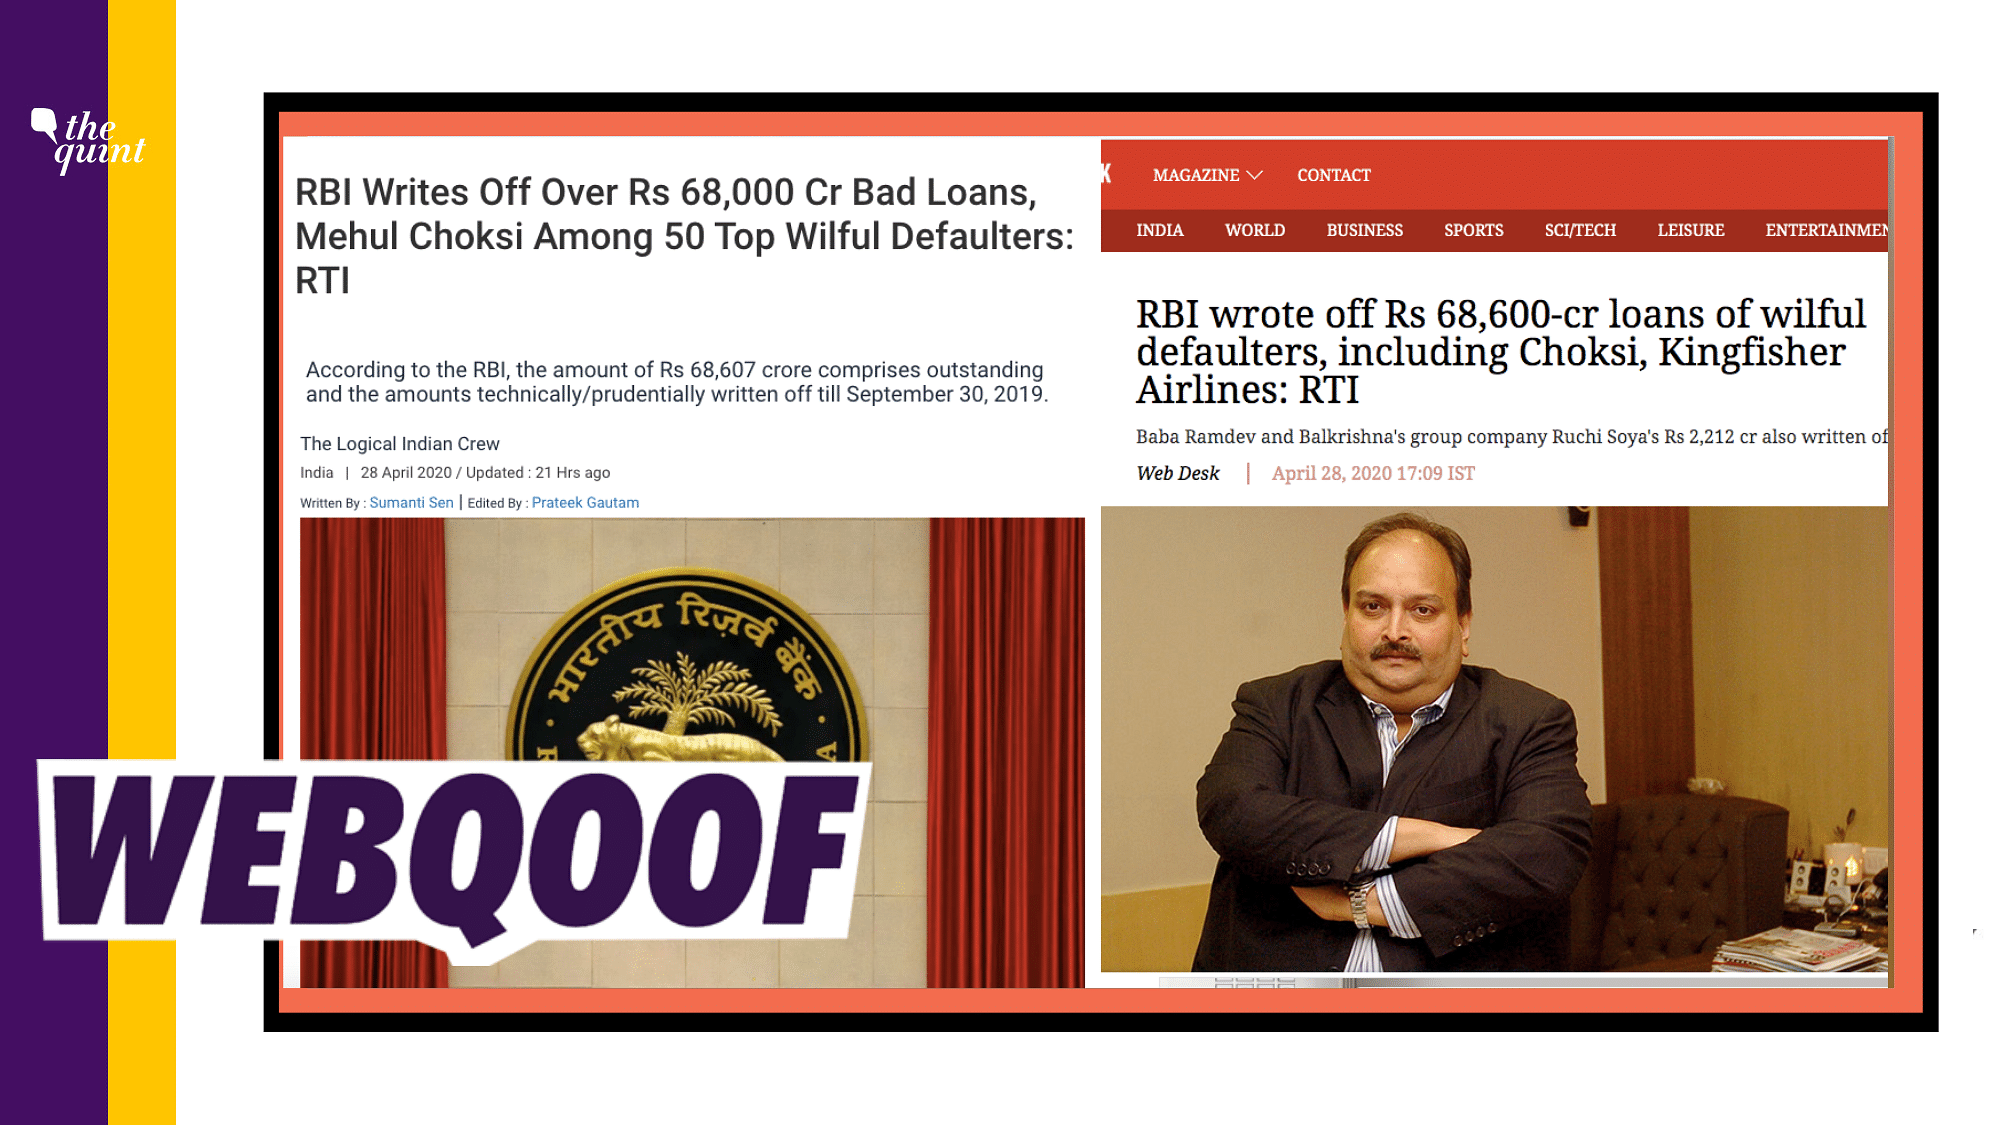 Some media outlets reported that RBI had written off loans worth Rs 68,607 crore due from 50 top wilful defaulters.